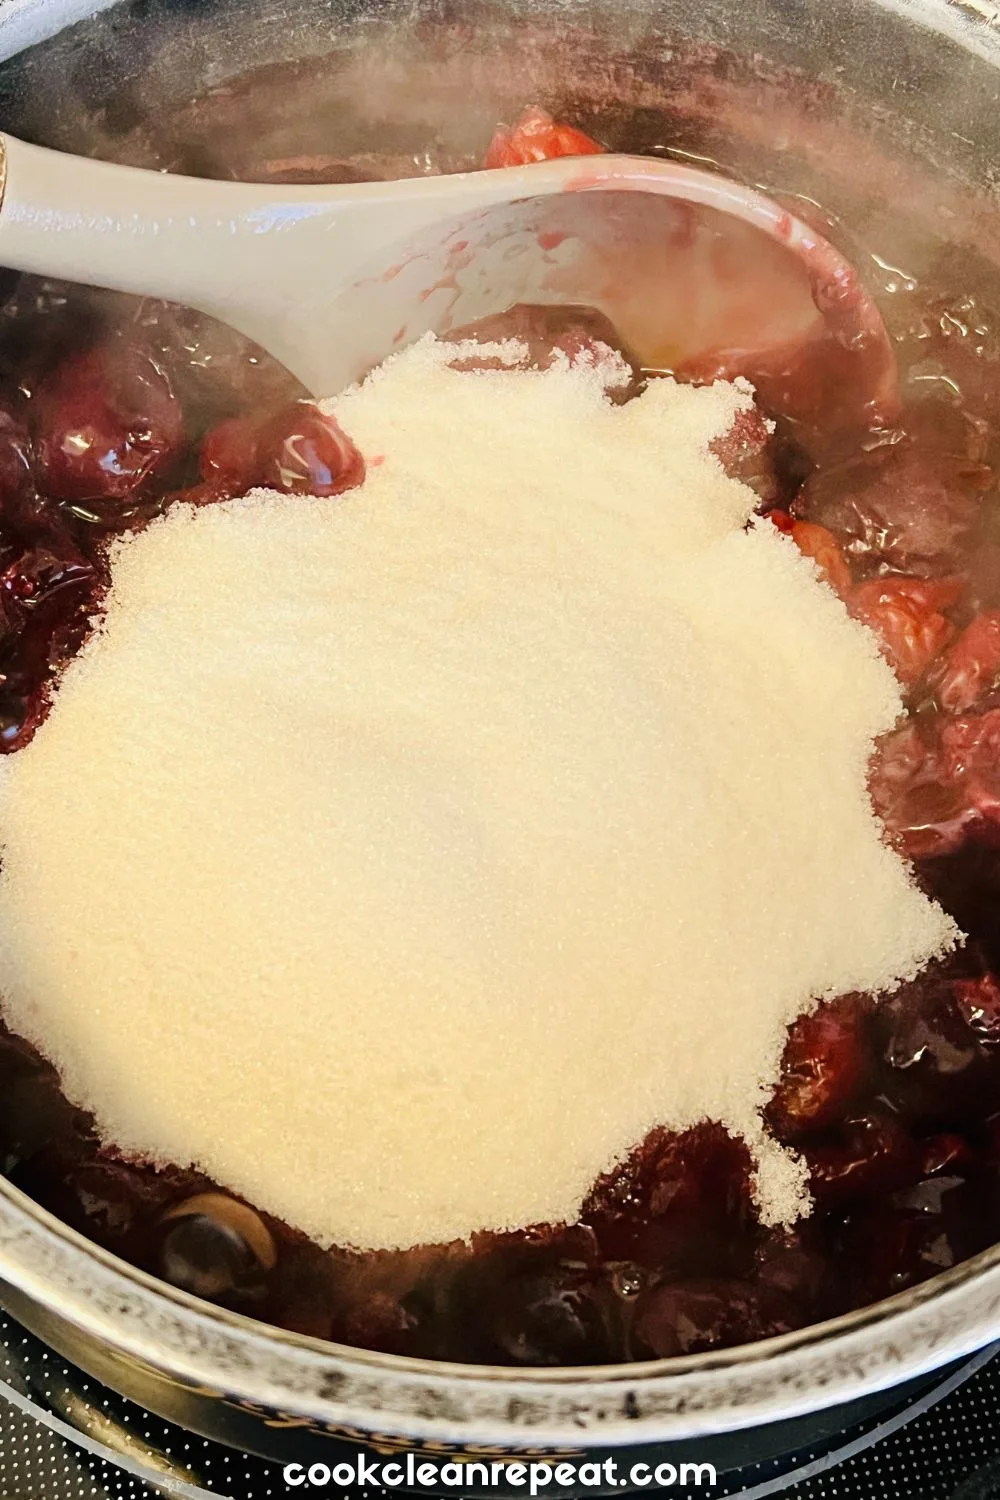 sugar being added to the cherry filling